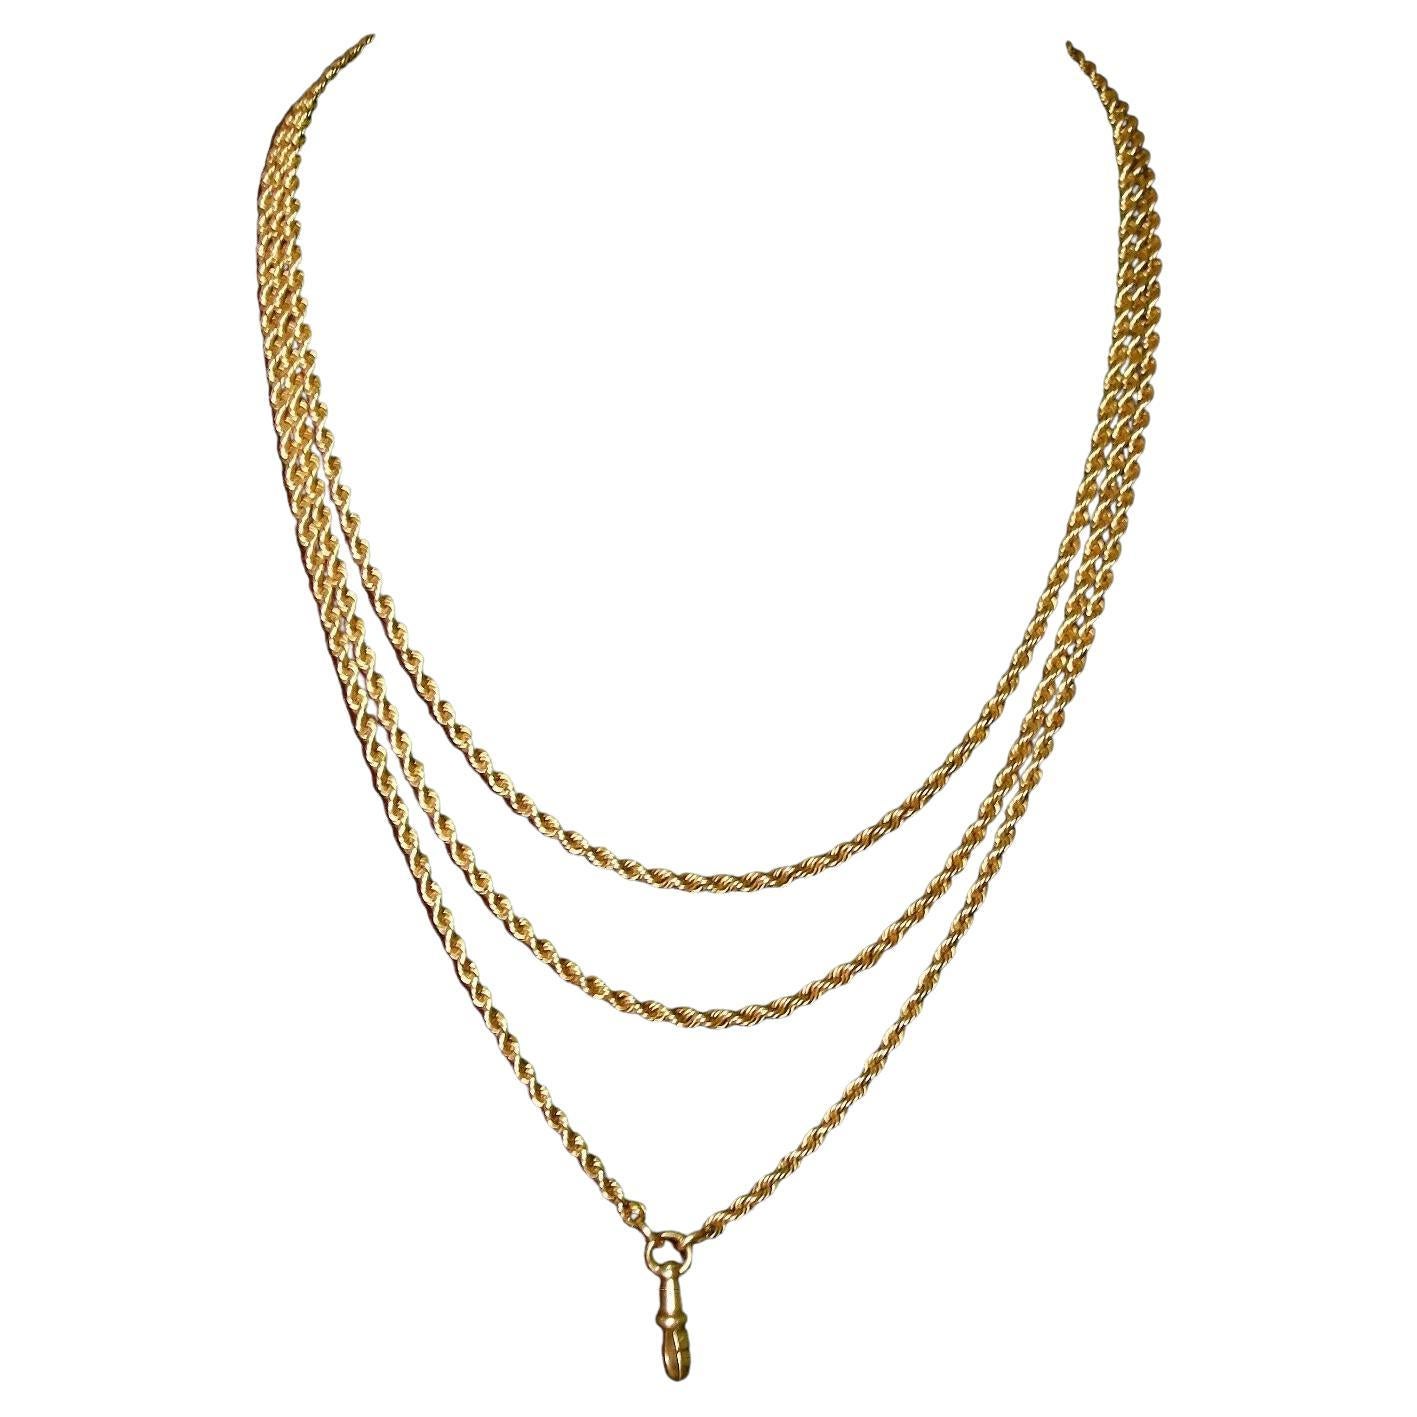 Victorian Gold Rope Twist Pocket Watch Chain / Necklace, U.S, circa 1880 For Sale